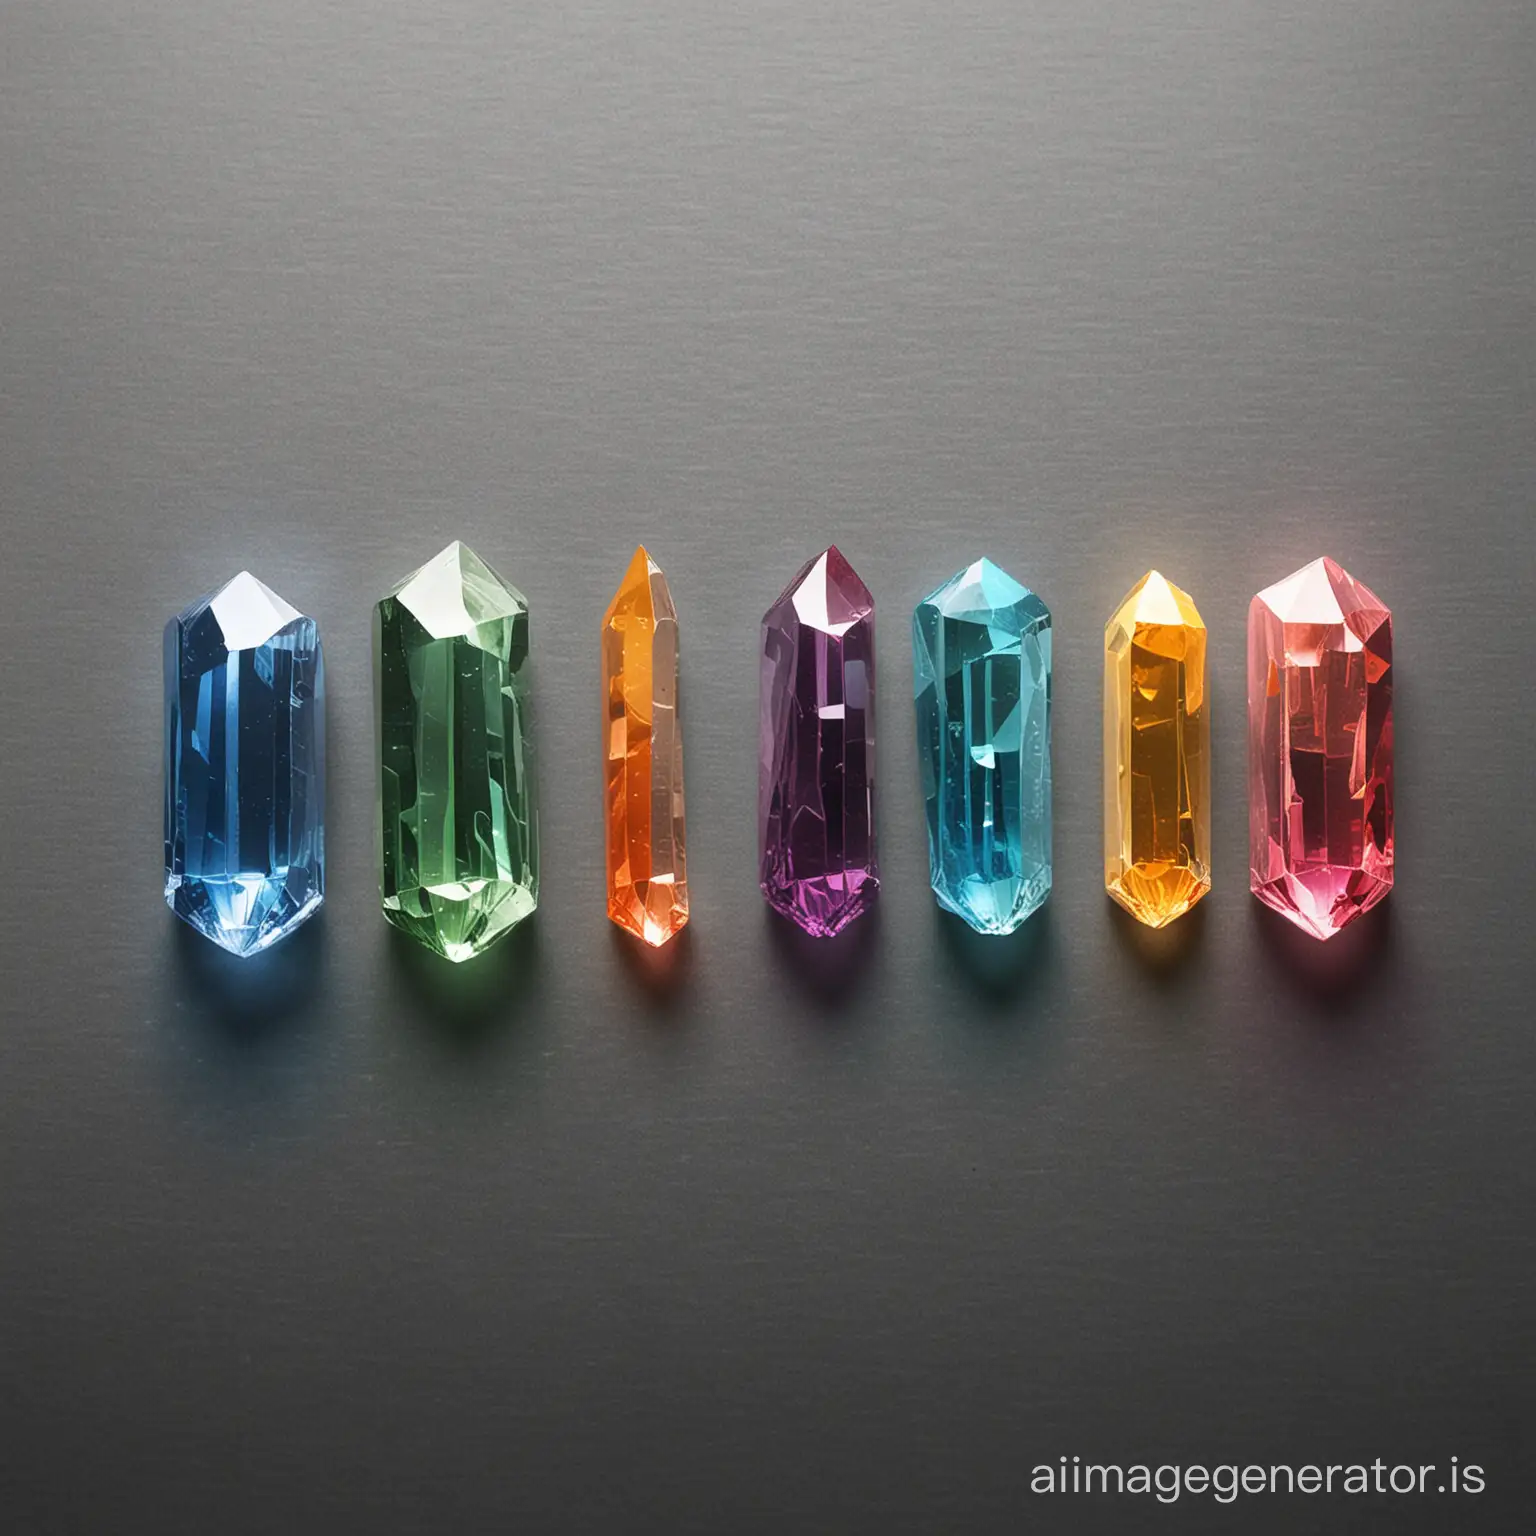 write word "COLORS" looks like crystals